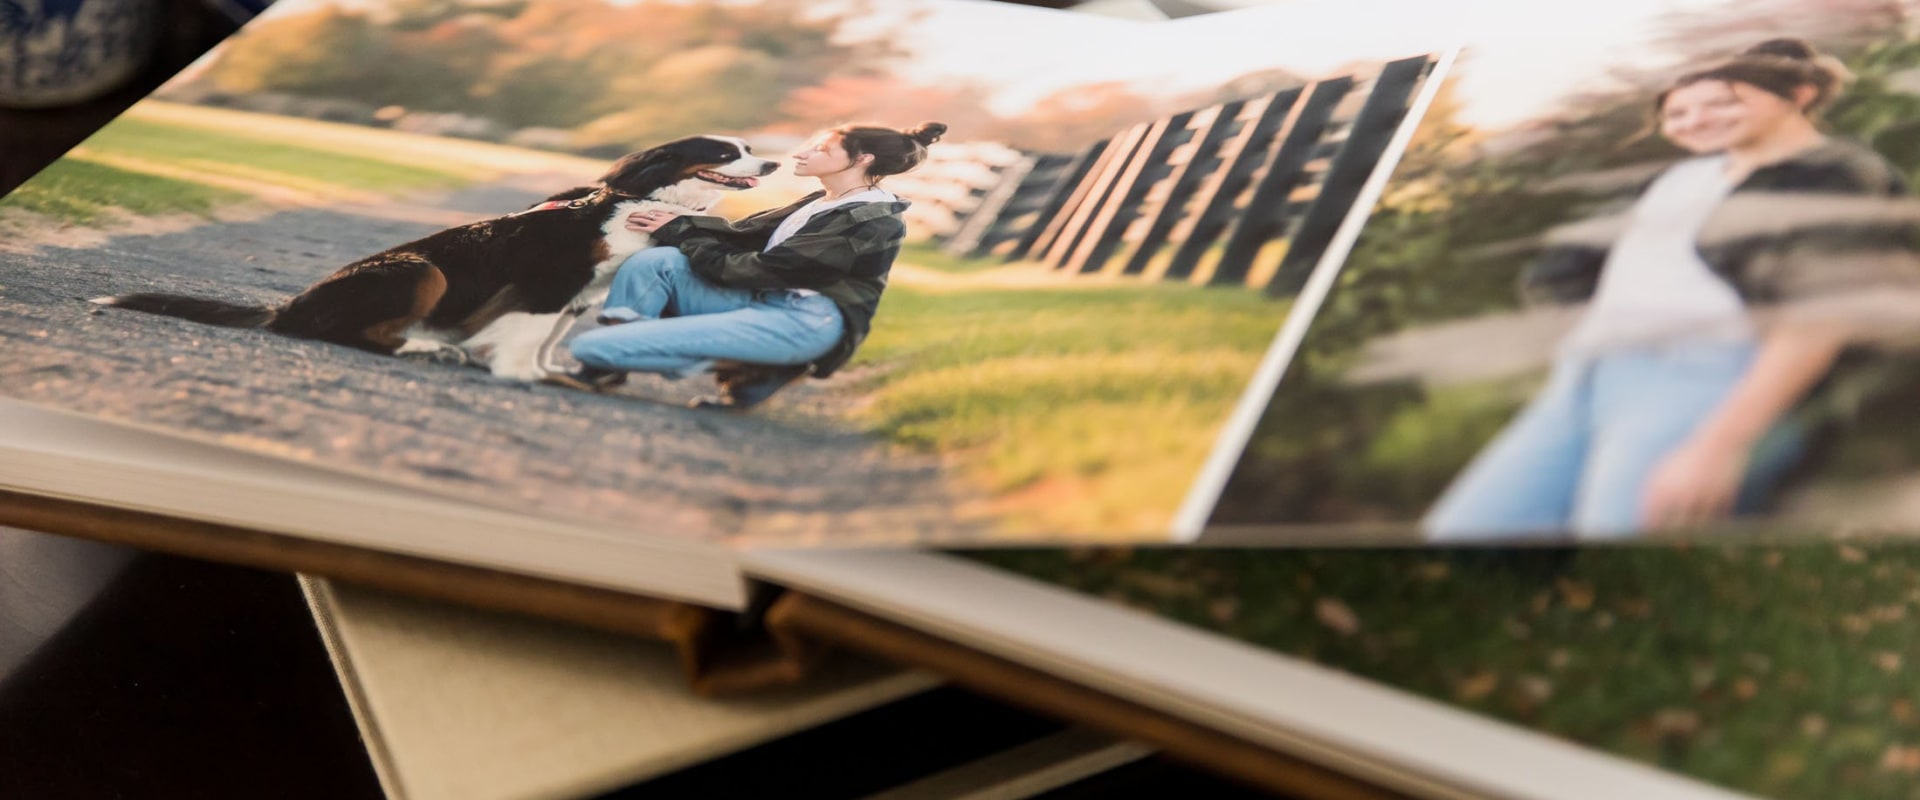 The Best Photo Album Printing Services in Bucks County, PA